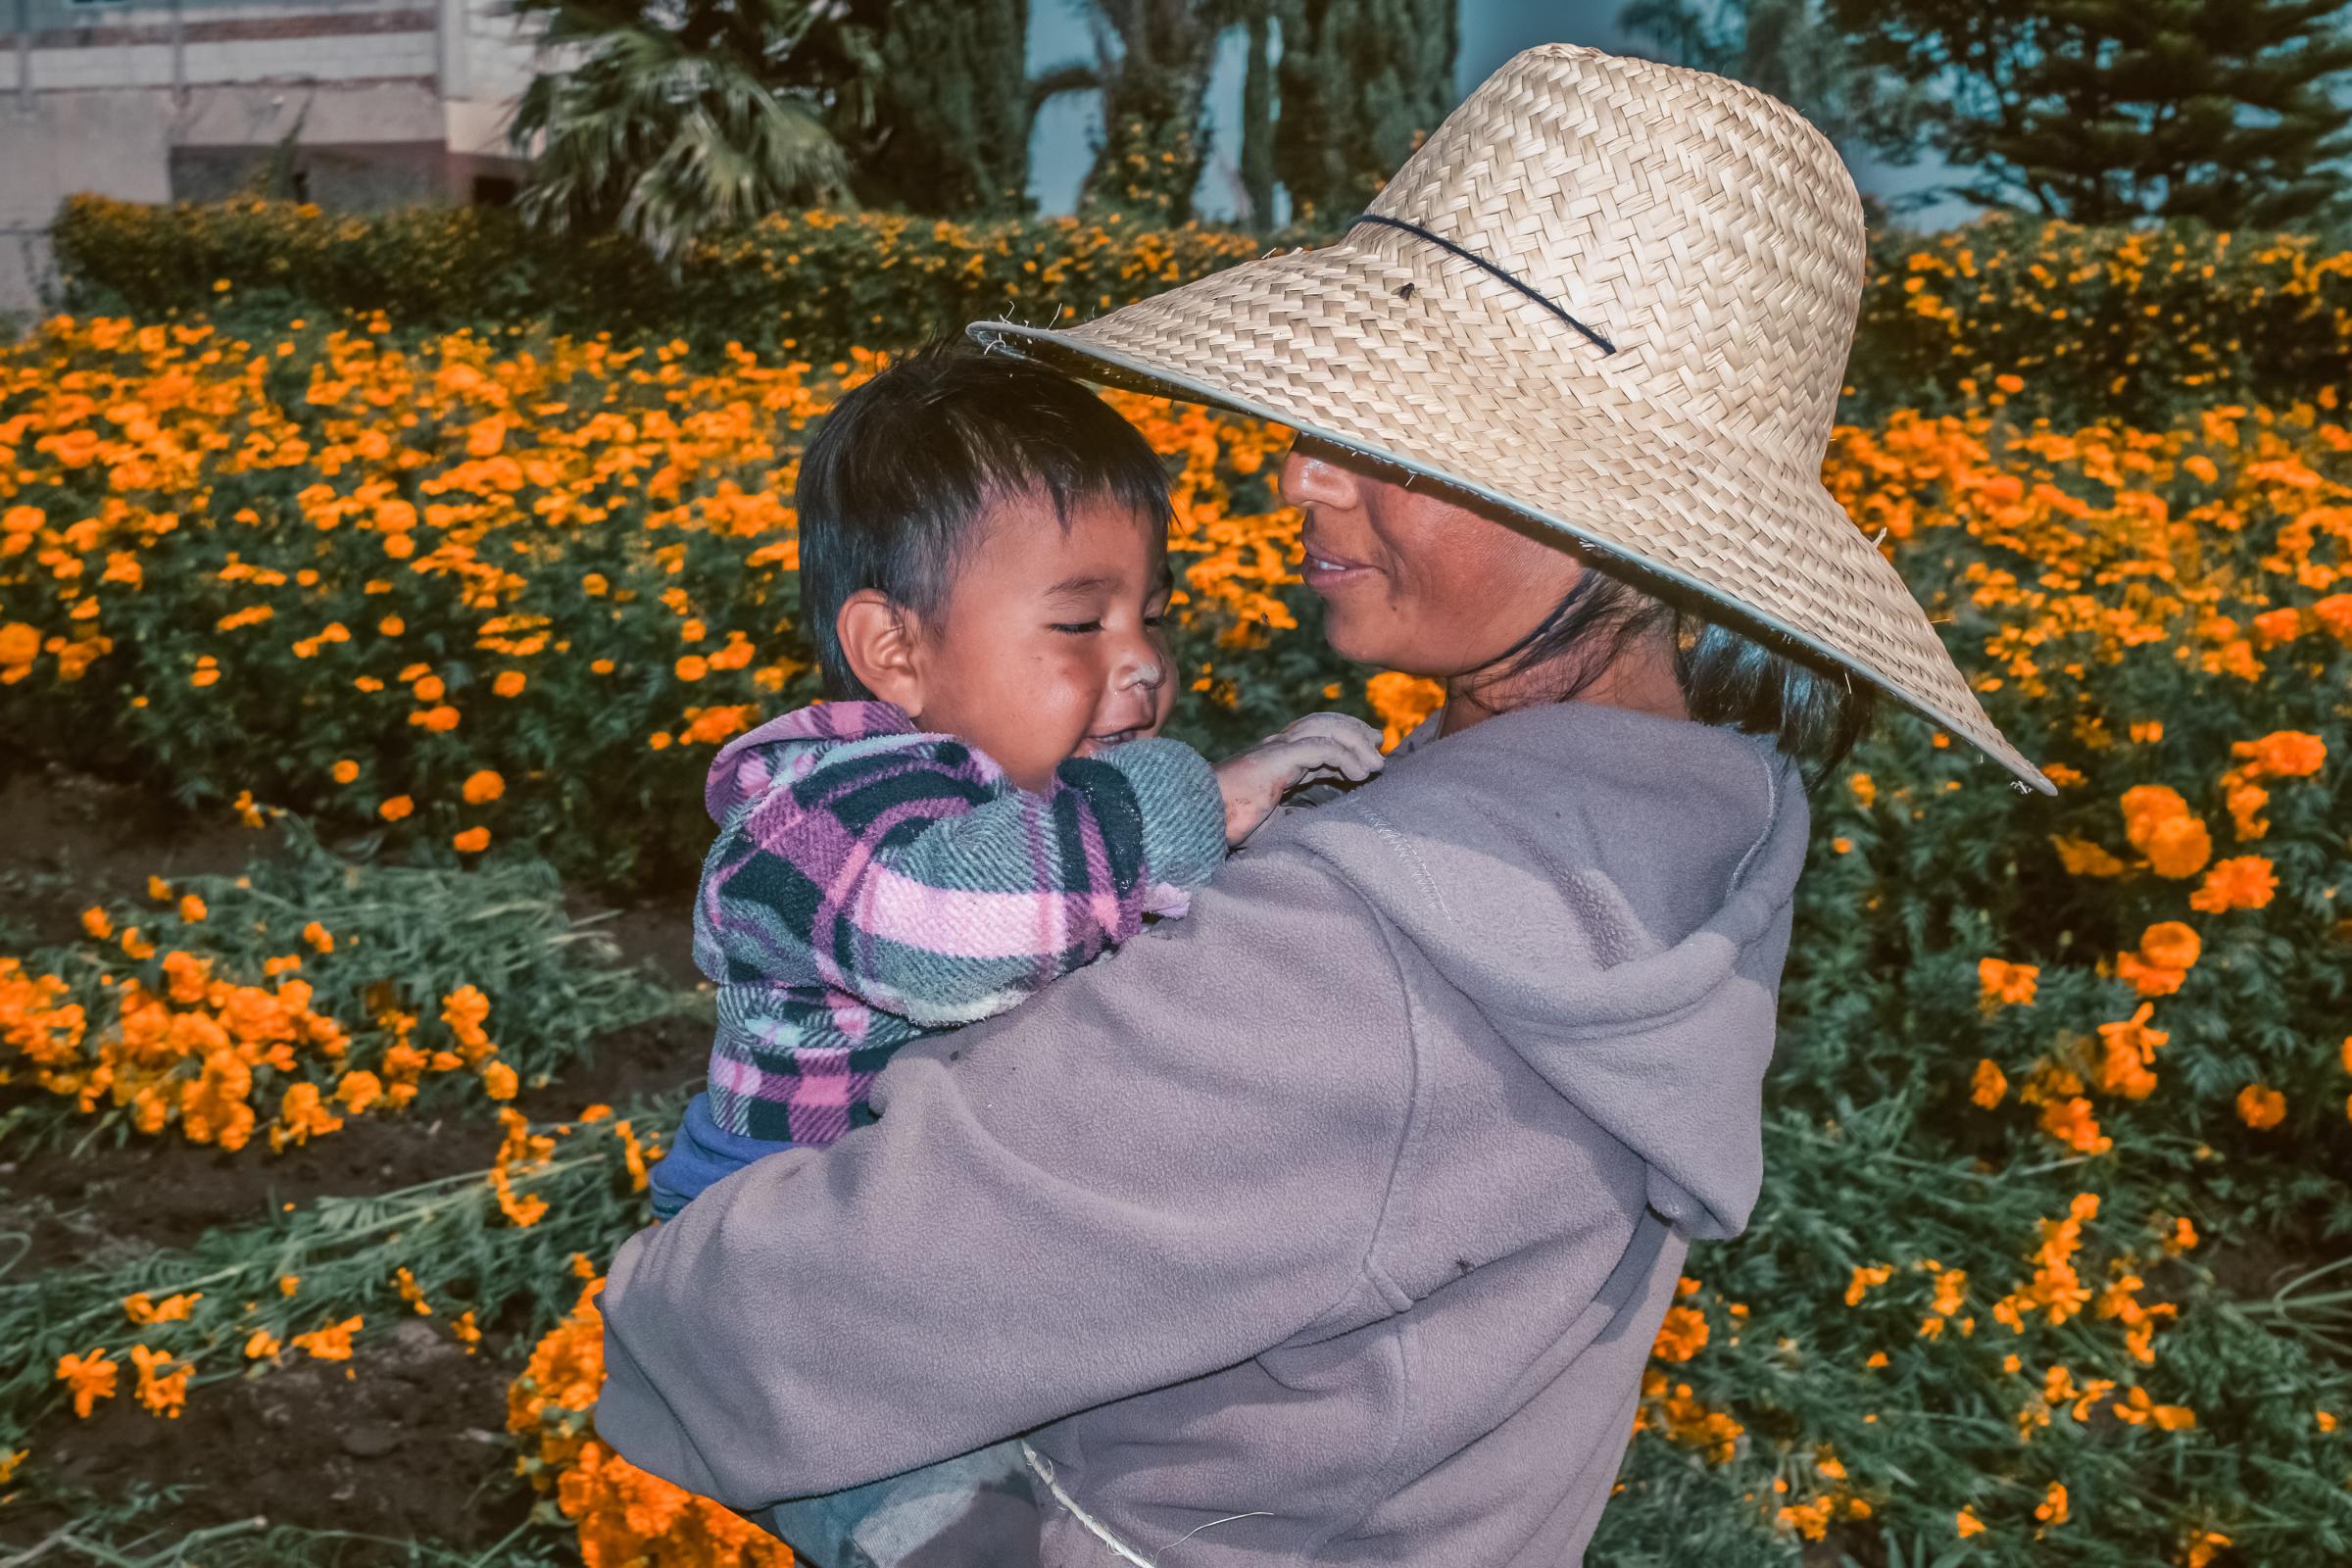 NPR - Meet the families harvesting the flowers that guide souls home on the Day of the Dead - Sara and her son Pablo during their work day harvesting...